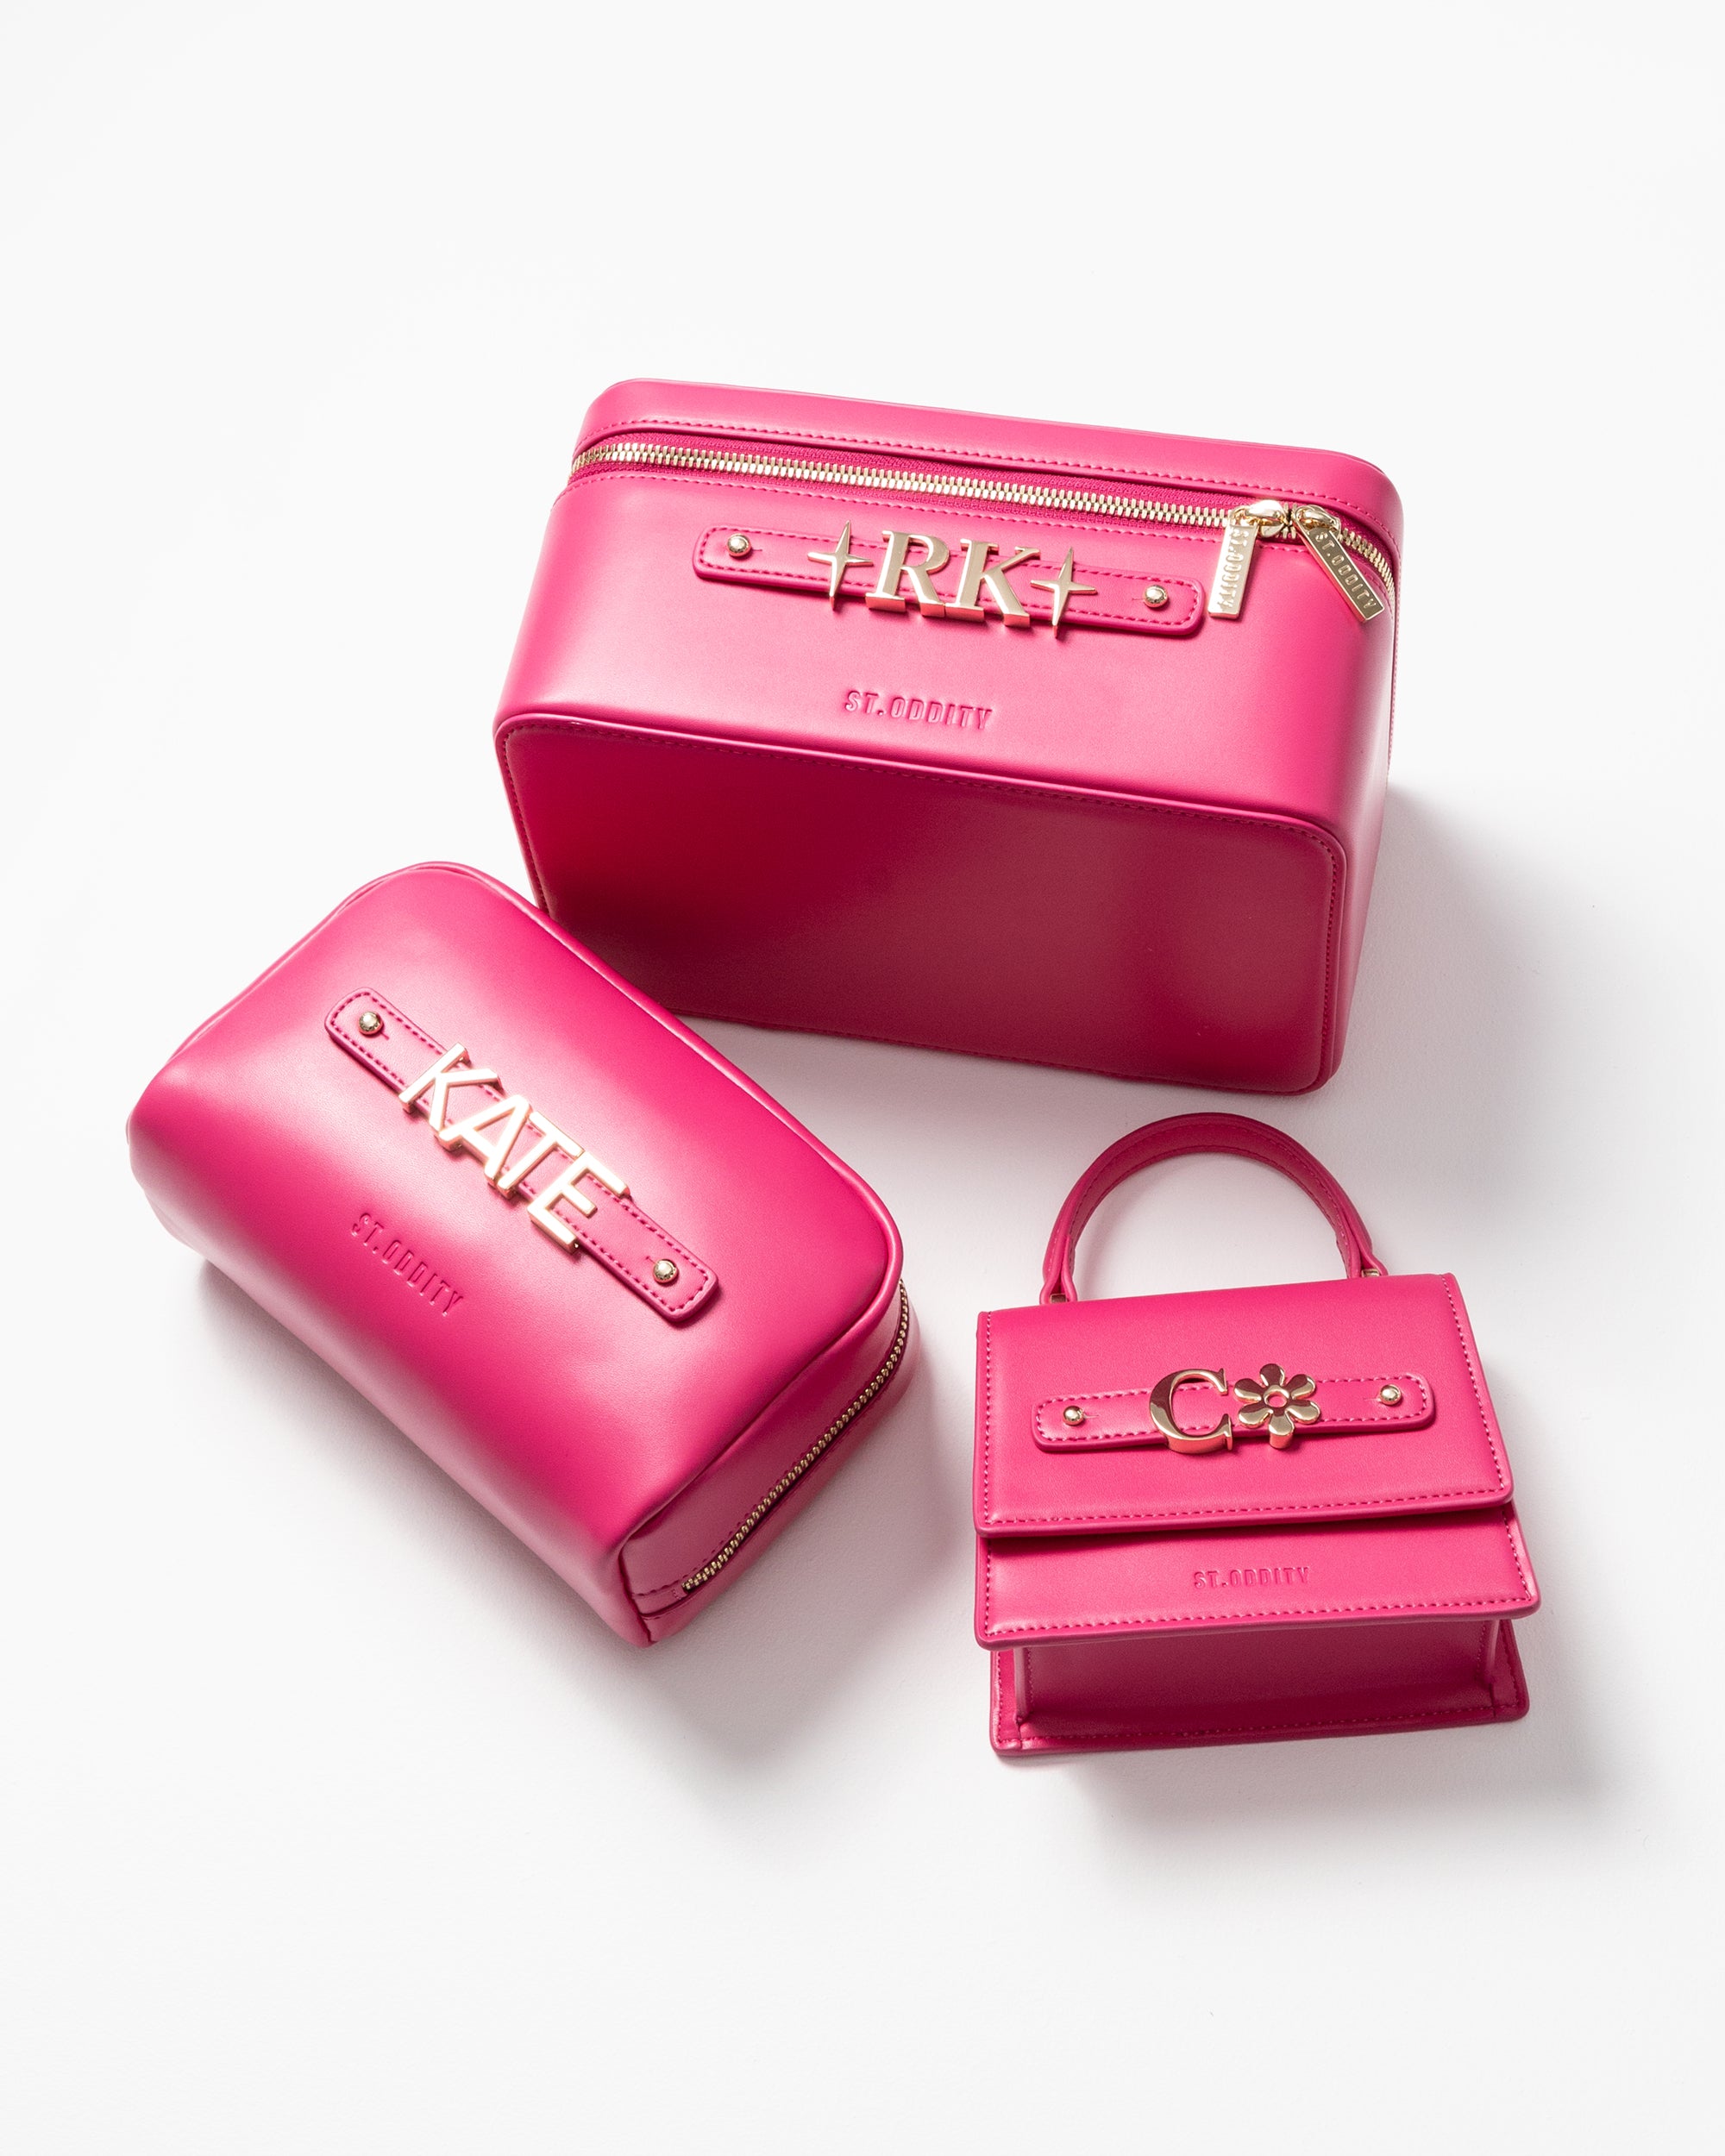 Vanity Case in Hot Pink with Personalised Hardware